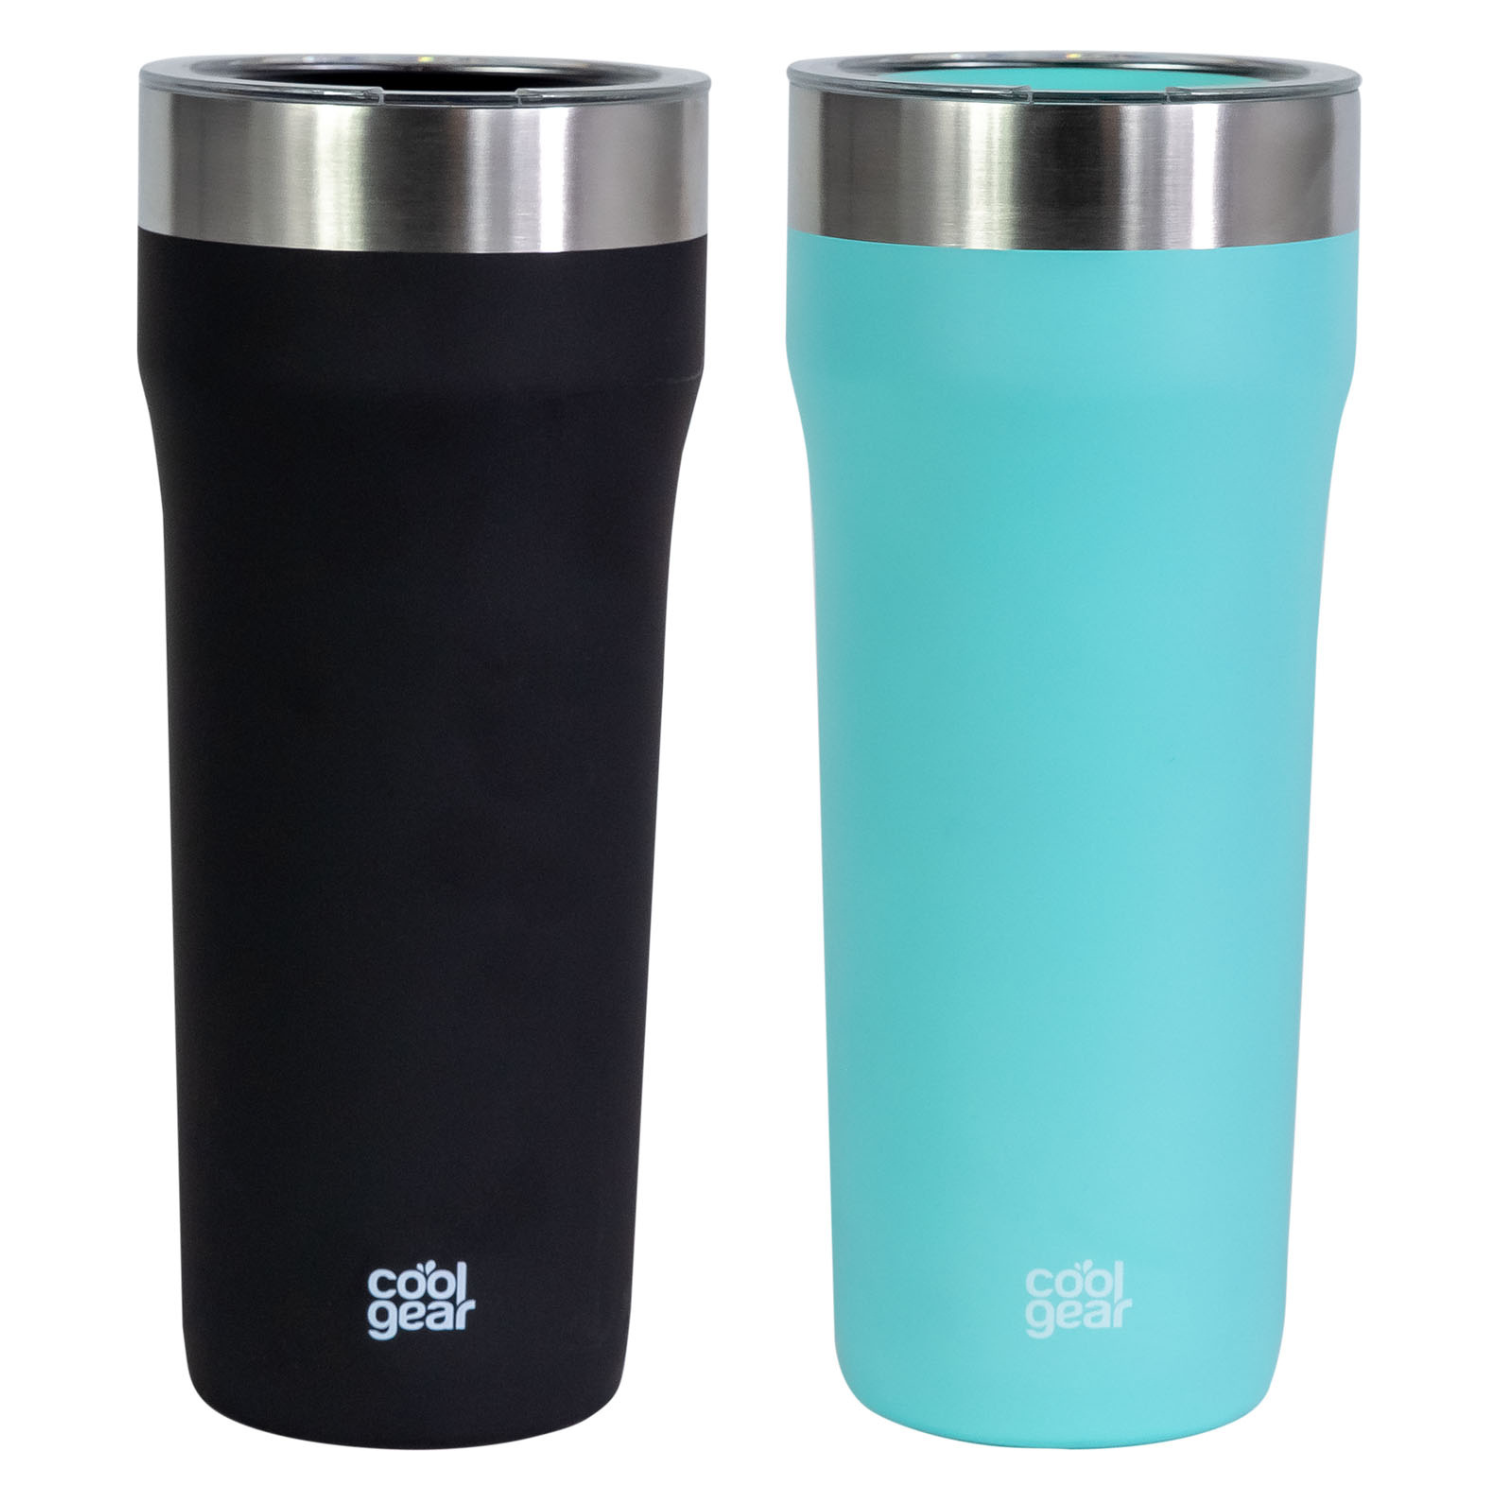 2 Pack COOL GEAR 16 oz Sumatra Coffee Travel Mug with Spill Resistant  Slider Lid | Re-Usable Colored Tumbler